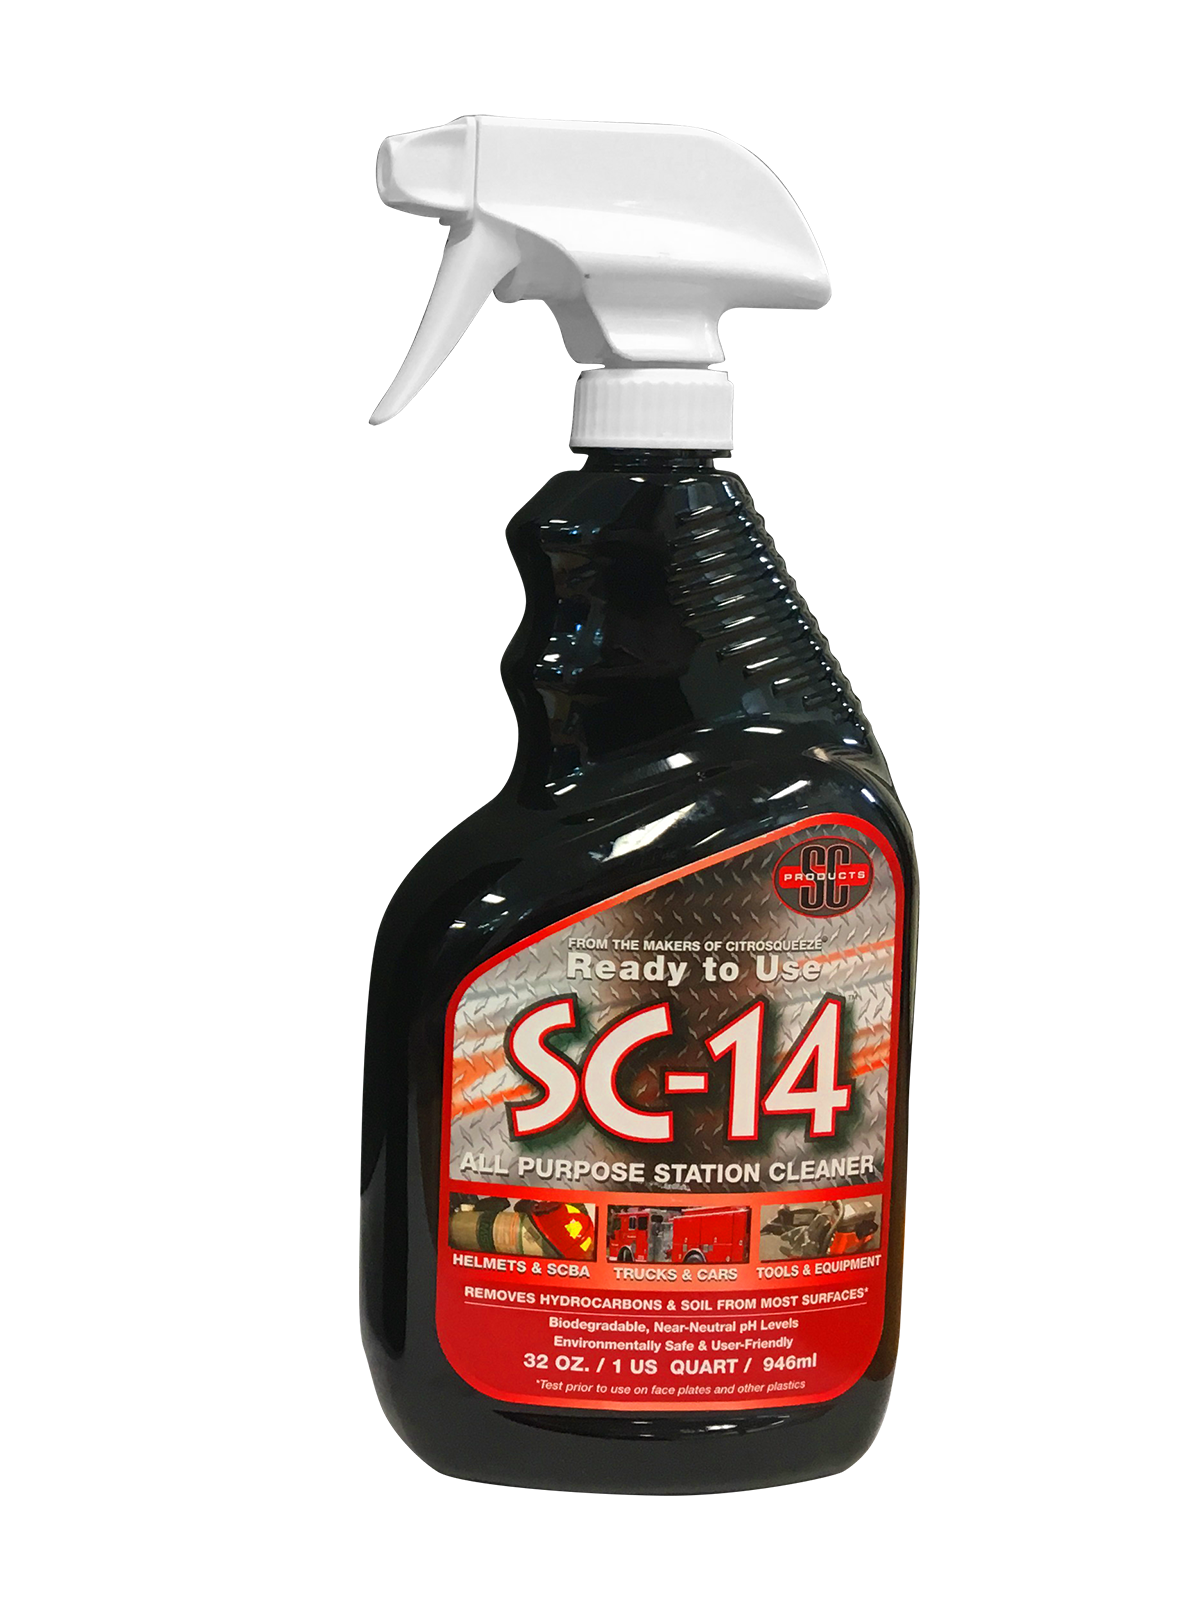 SC-14 All Purpose PPE Cleaner